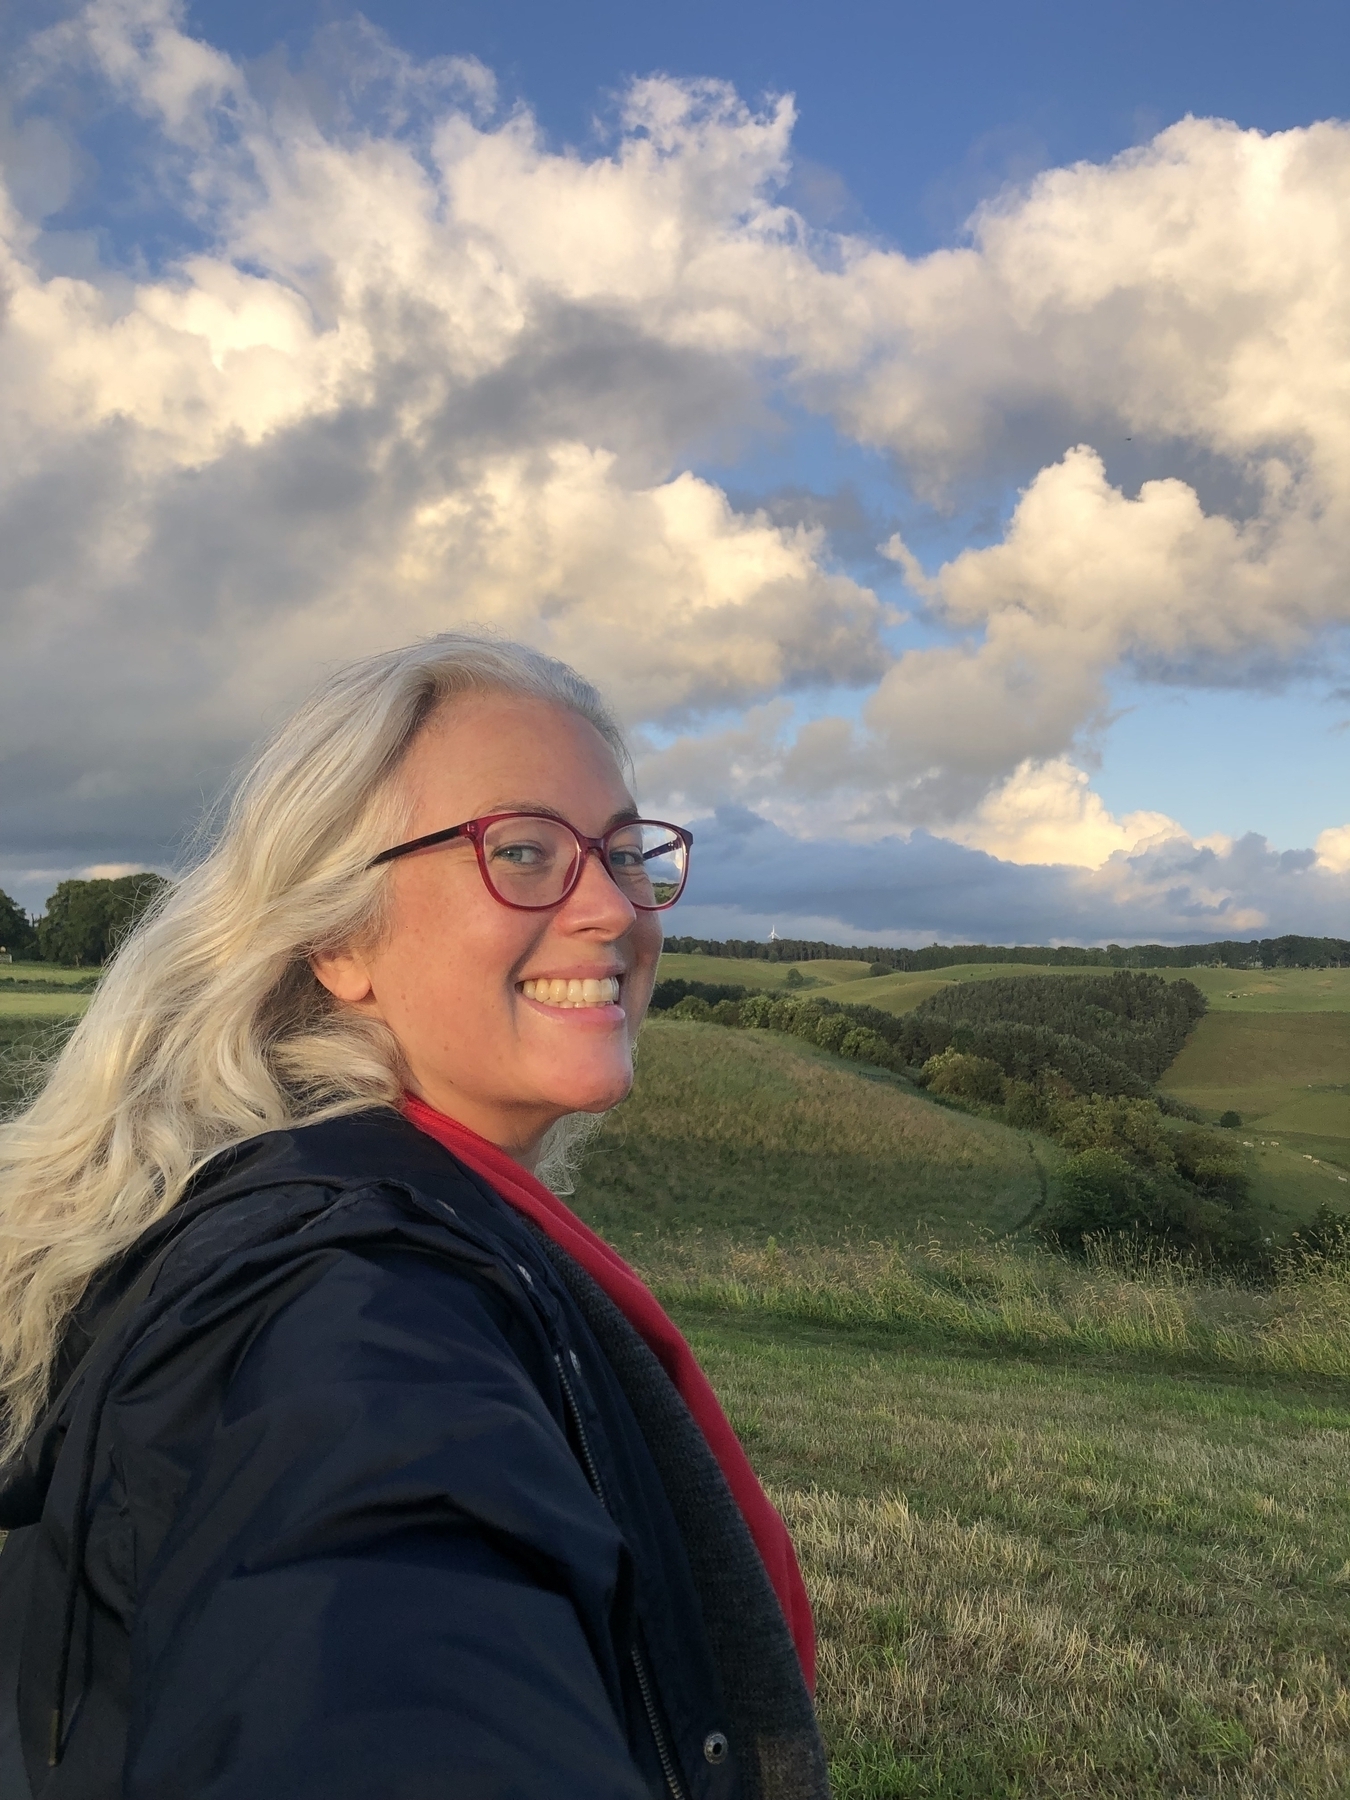 Sunlit clouds, green hills and a girl with red glasses and silver hair smiling profusely